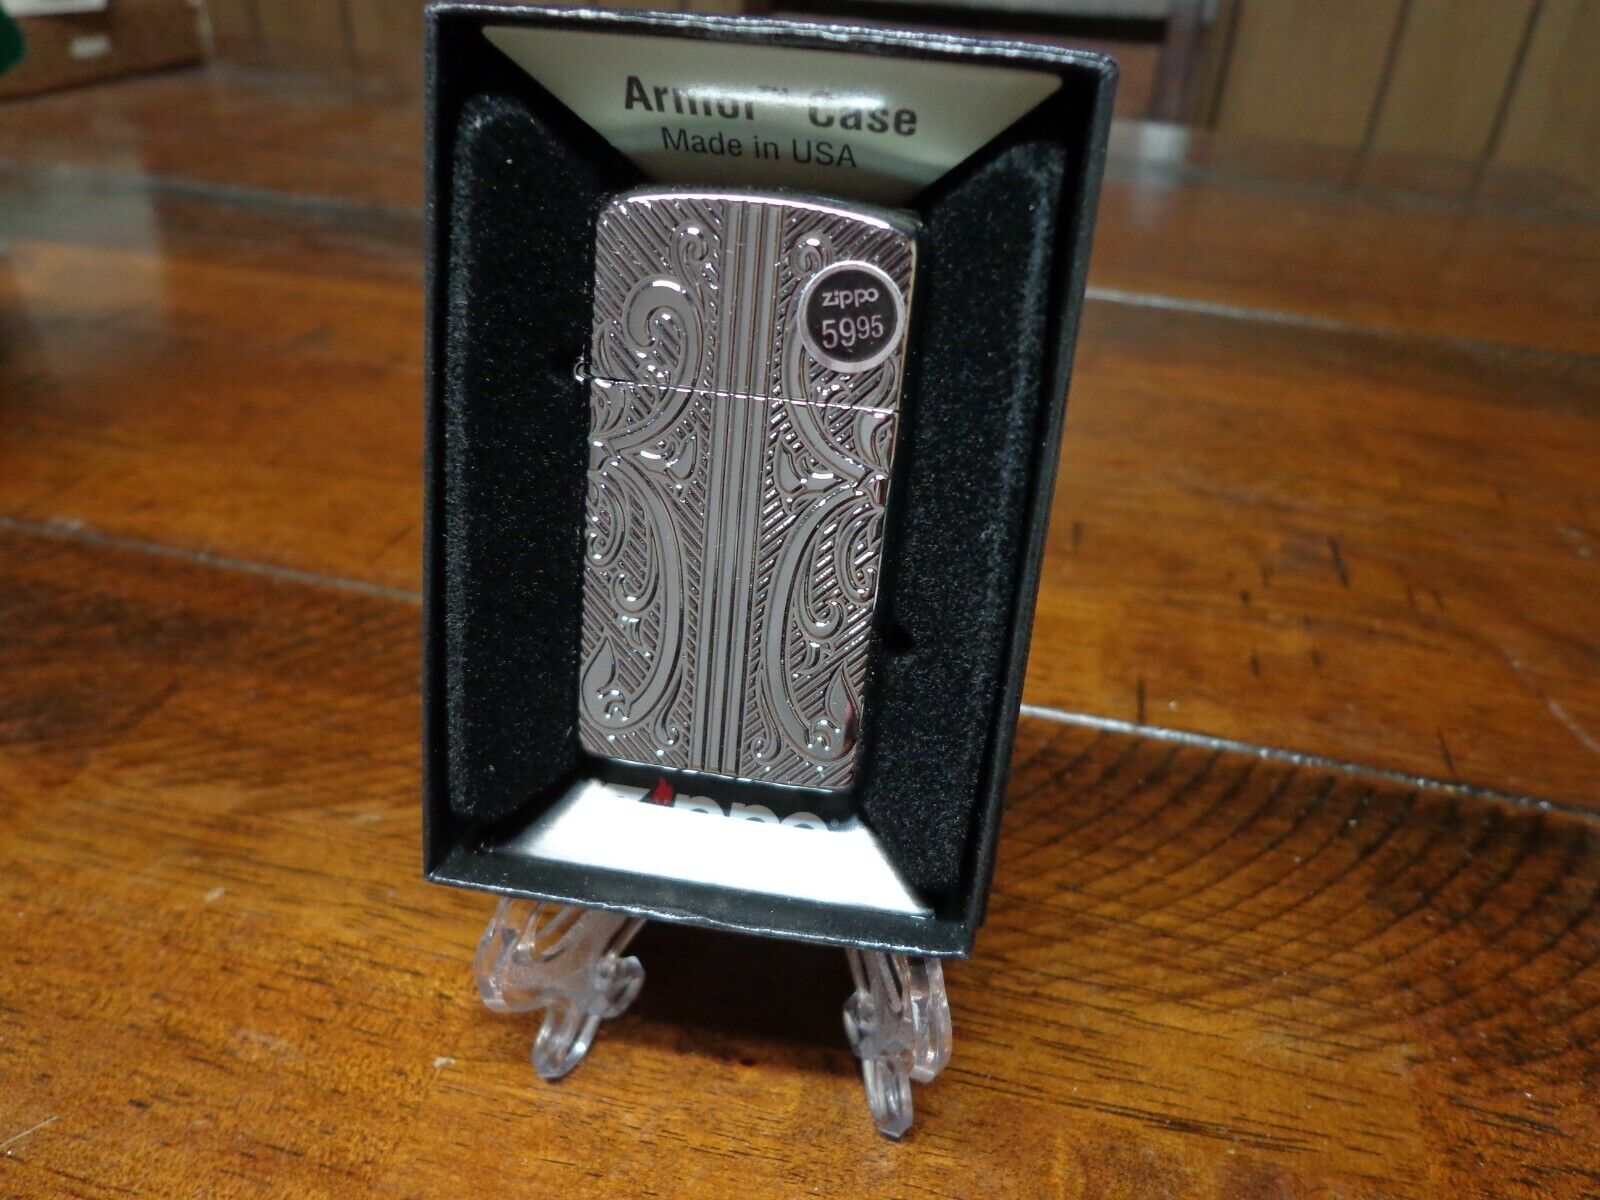 EXQUISITE 2 SIDED ARMOR SLIM ZIPPO LIGHTER MINT IN BOX 2016